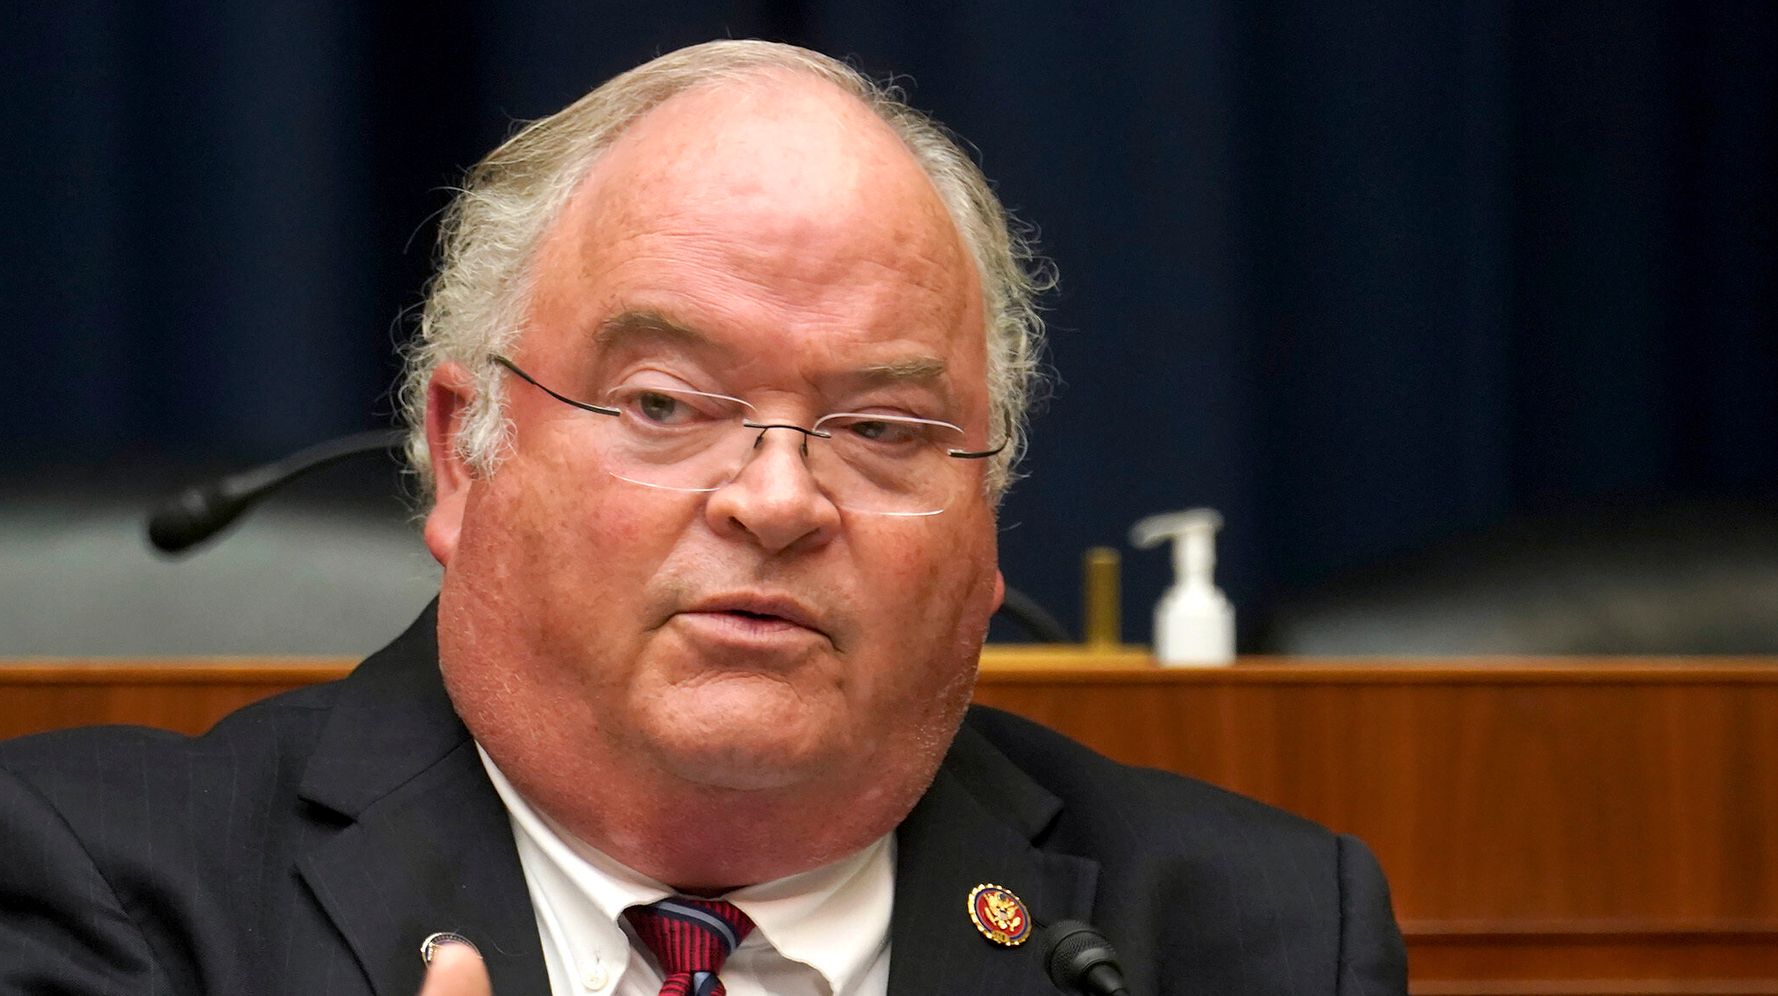 GOP Lawmaker Manages To Blame Abortion For Mass Shootings